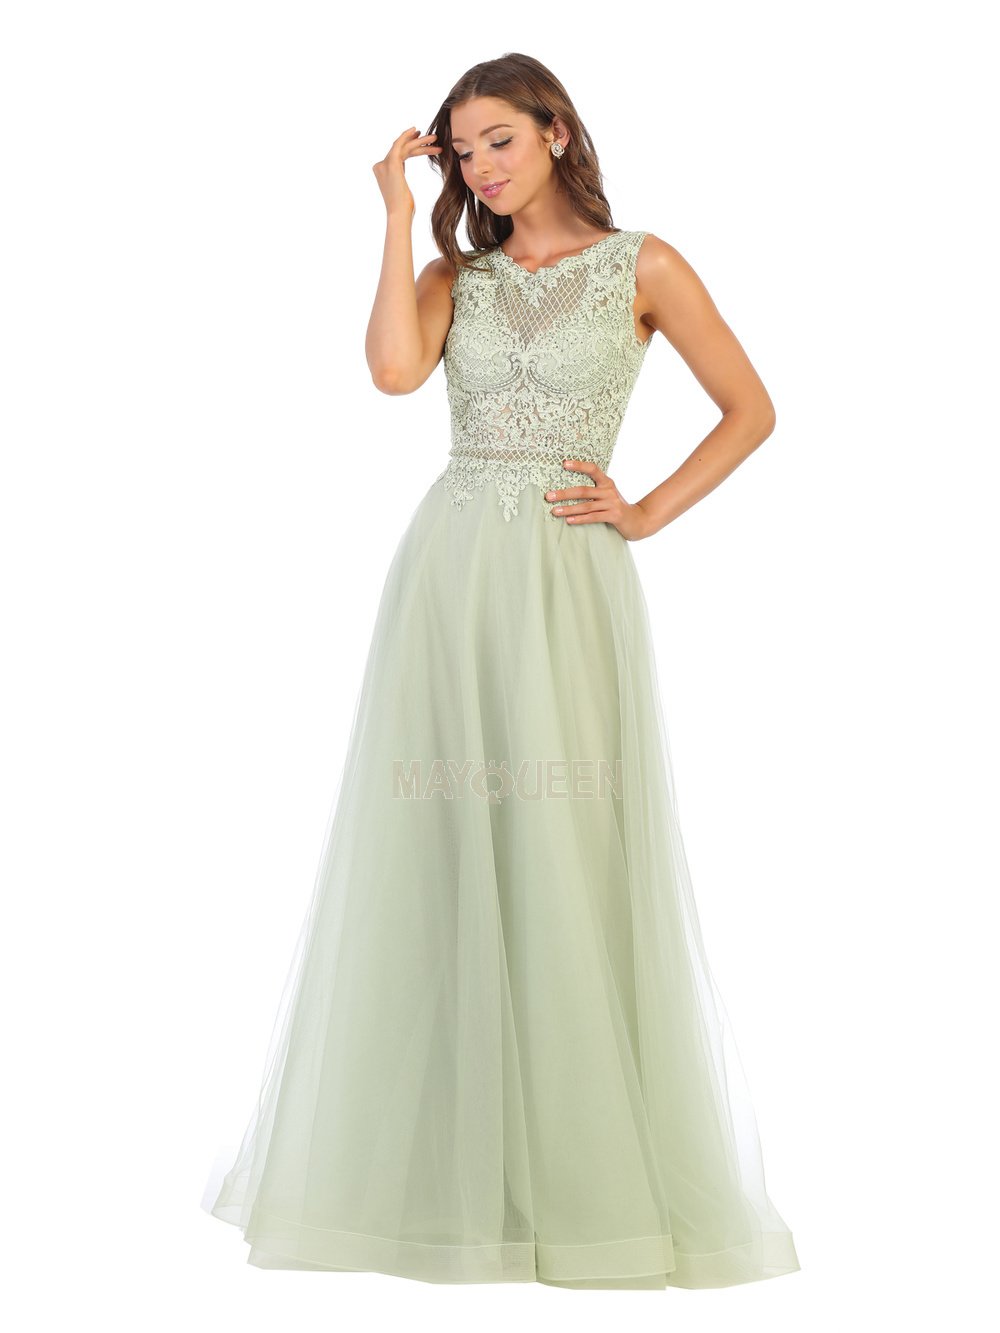 May Queen - MQ1717 Sheer Lattice Rendered Tulle Dress In Green